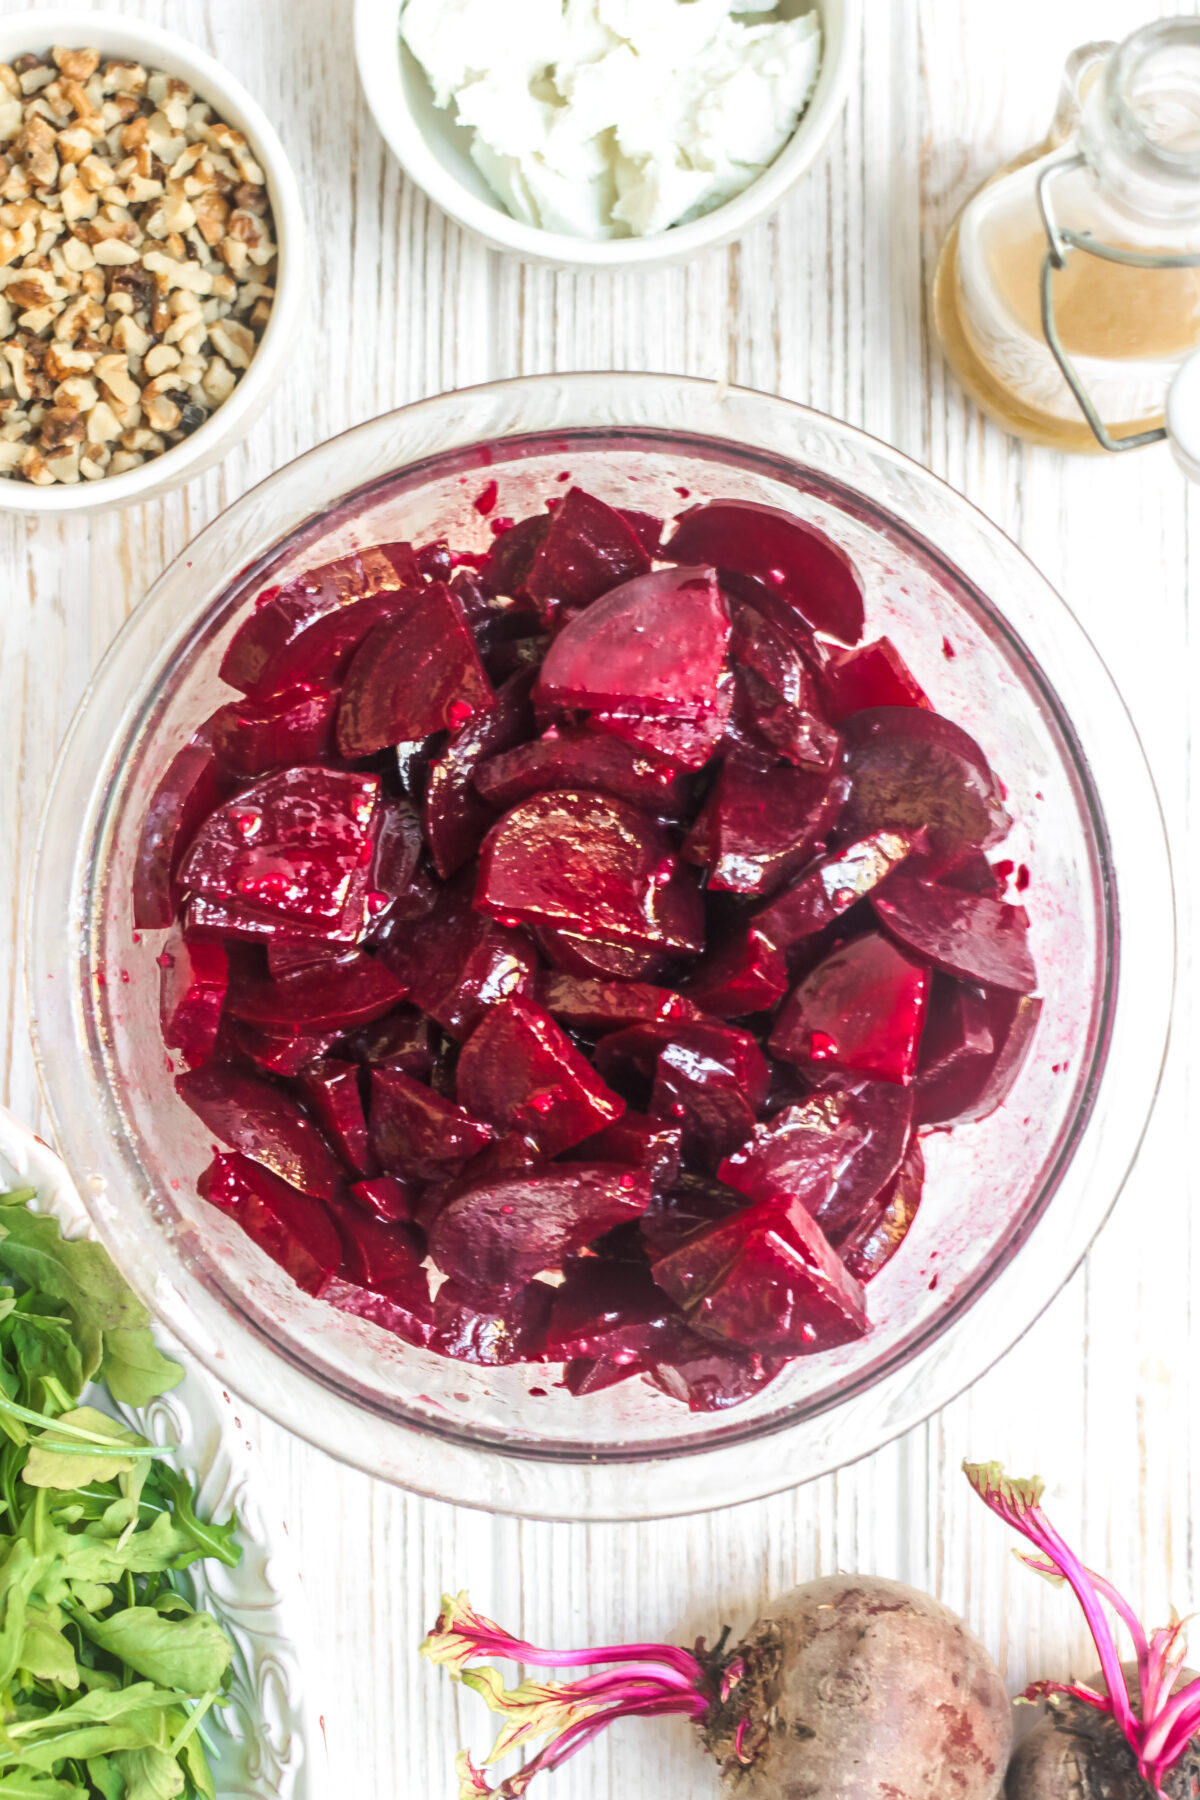 Beets marinating in a glass bowl.